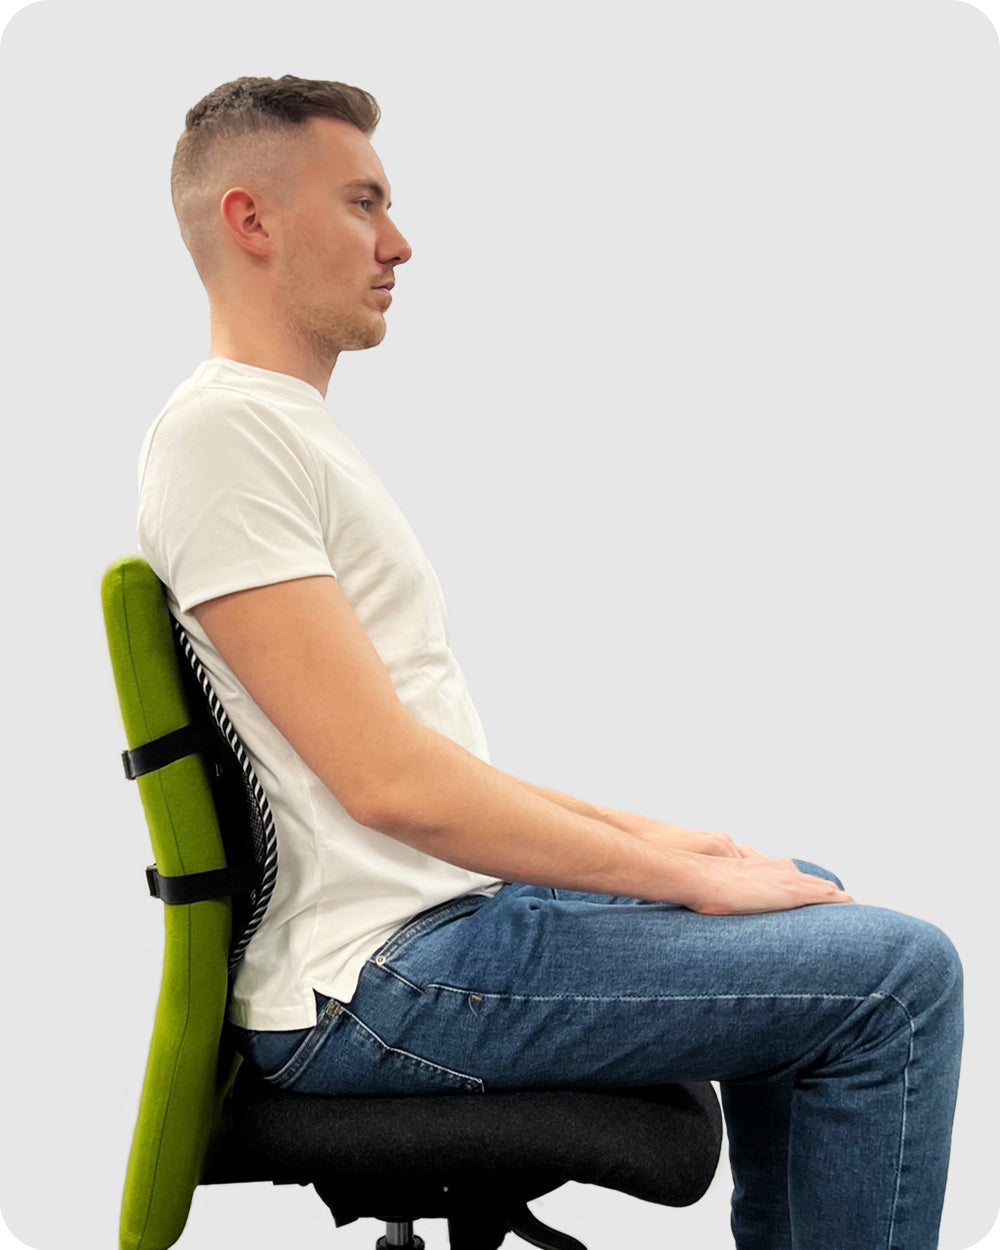 Chair back support - Alleviate Back Discomfort and Improve Posture -  Donnerberg